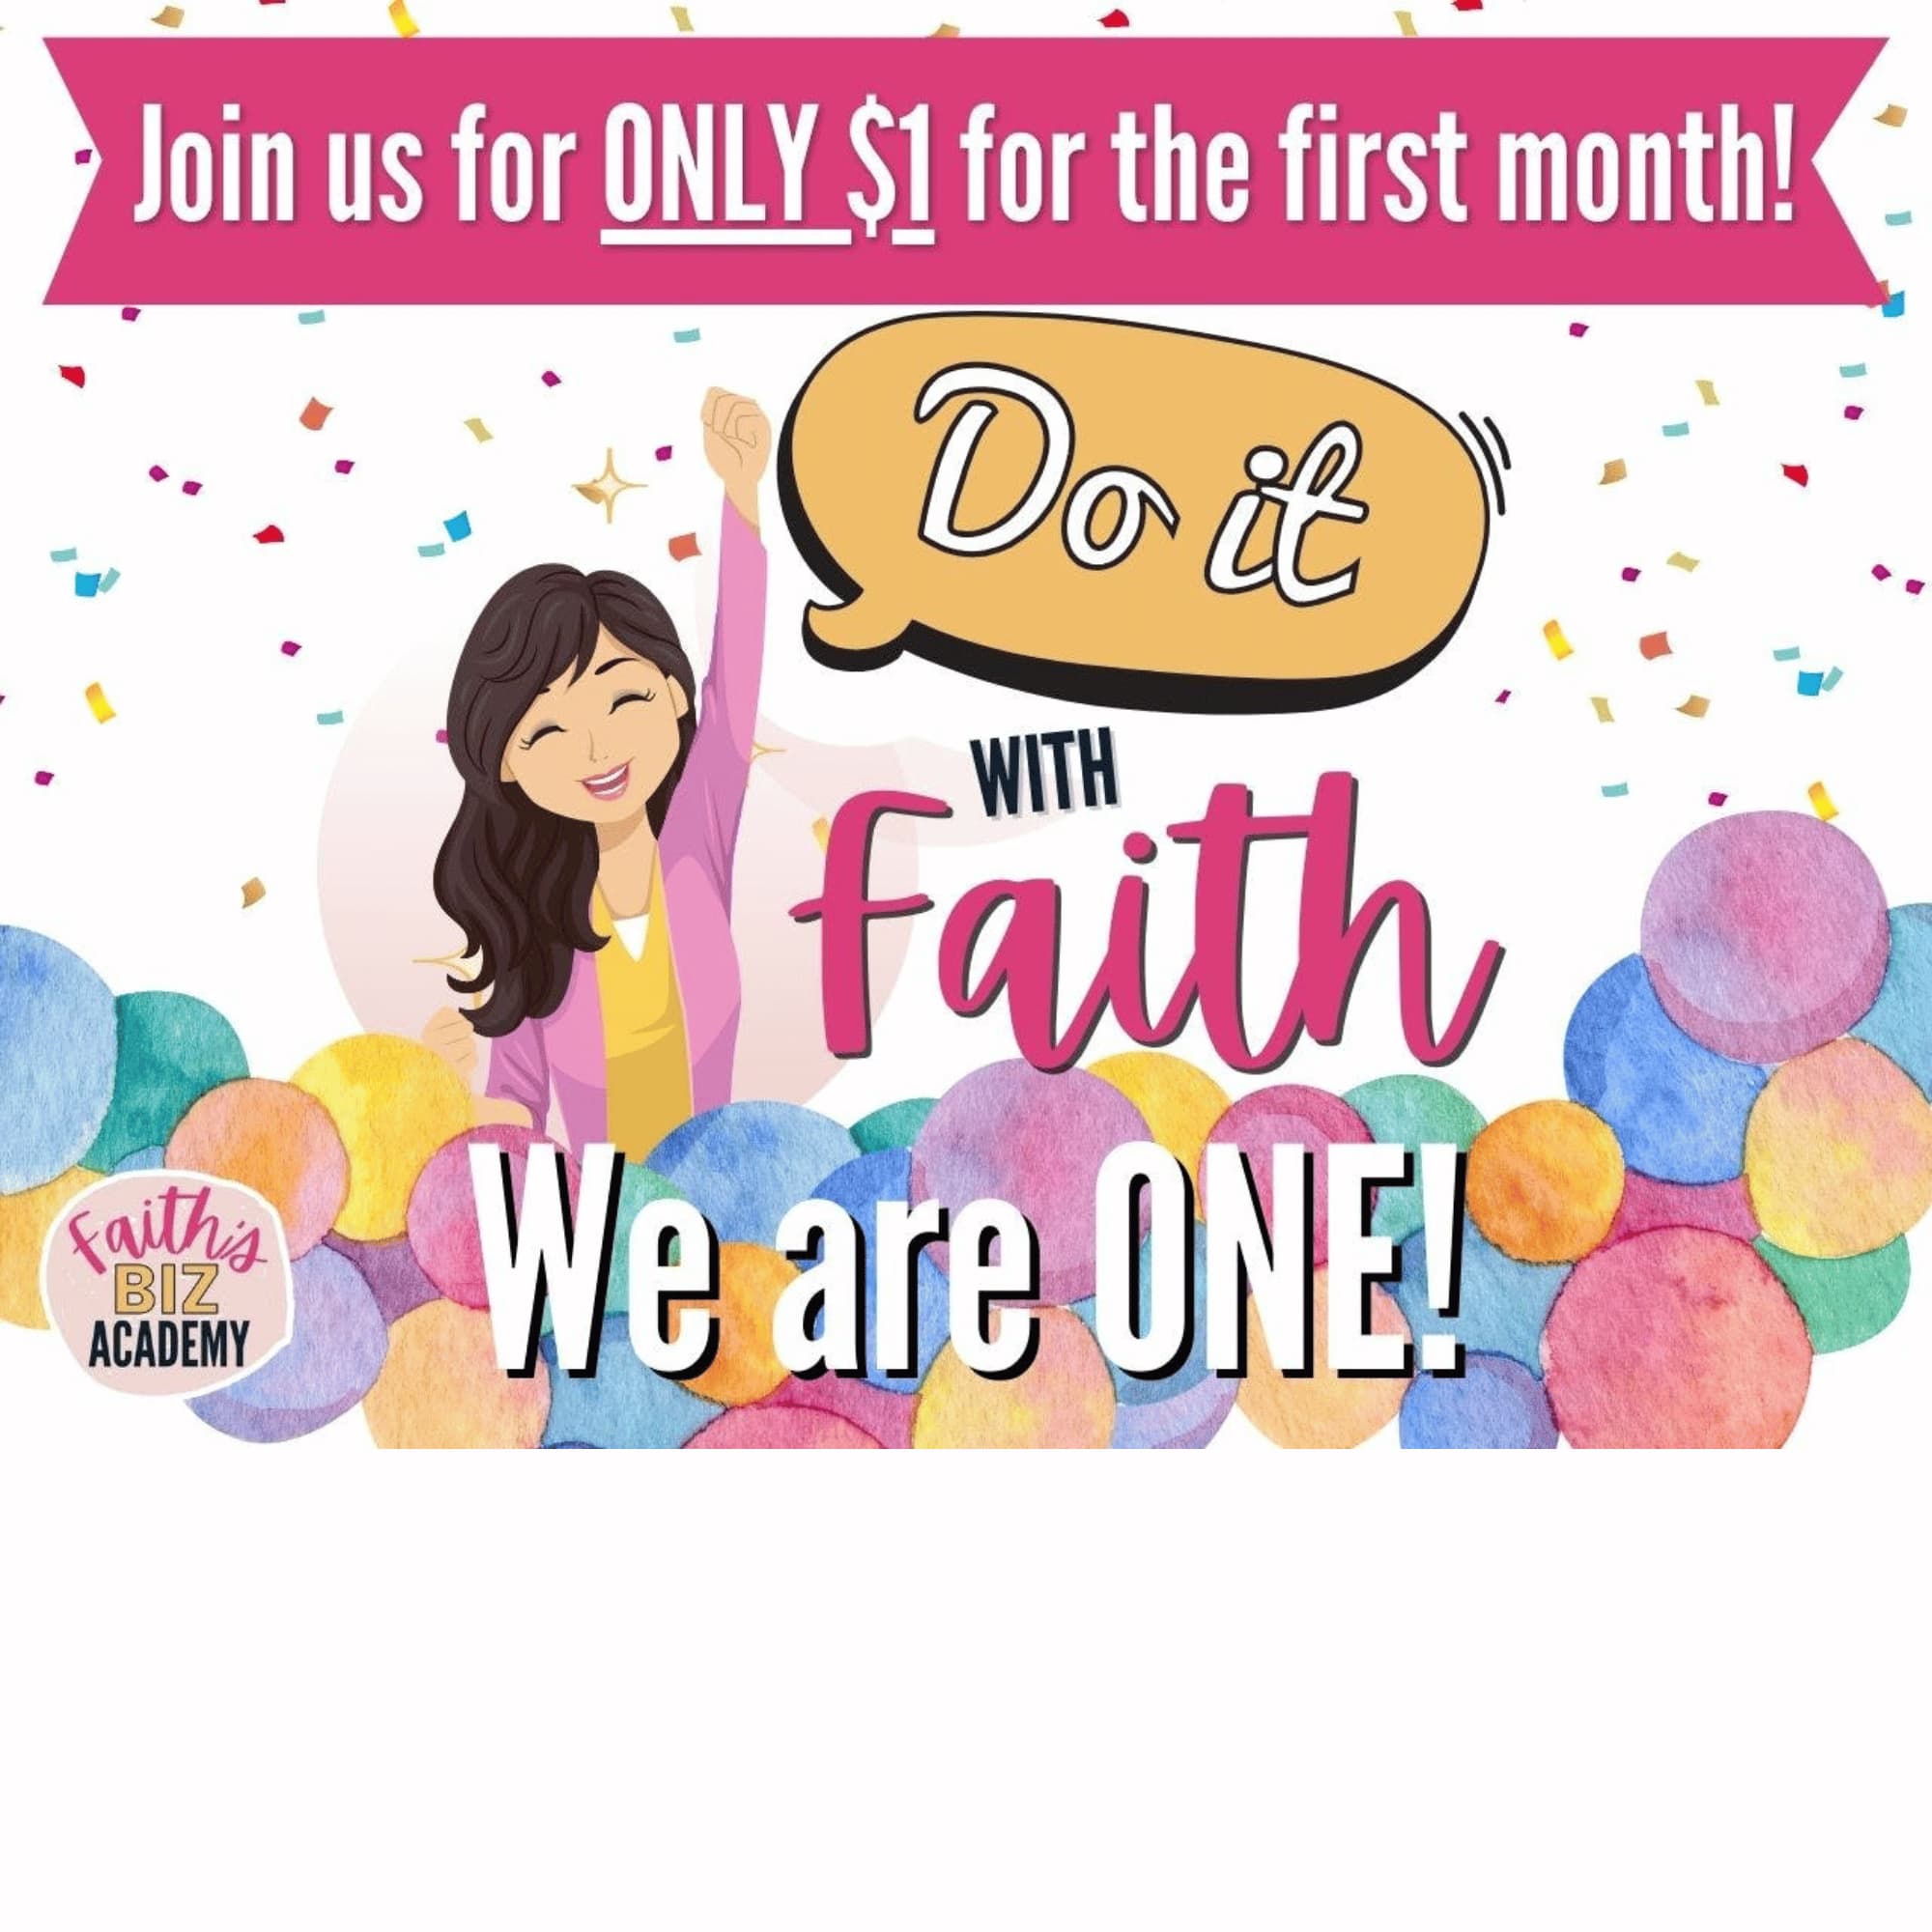 Anniversary Party, Join the Do It with Faith Membership from Faith’s Biz Academy, pay only $1 in your first month and thereafter pay only $9 per month, available until July 28th 2024